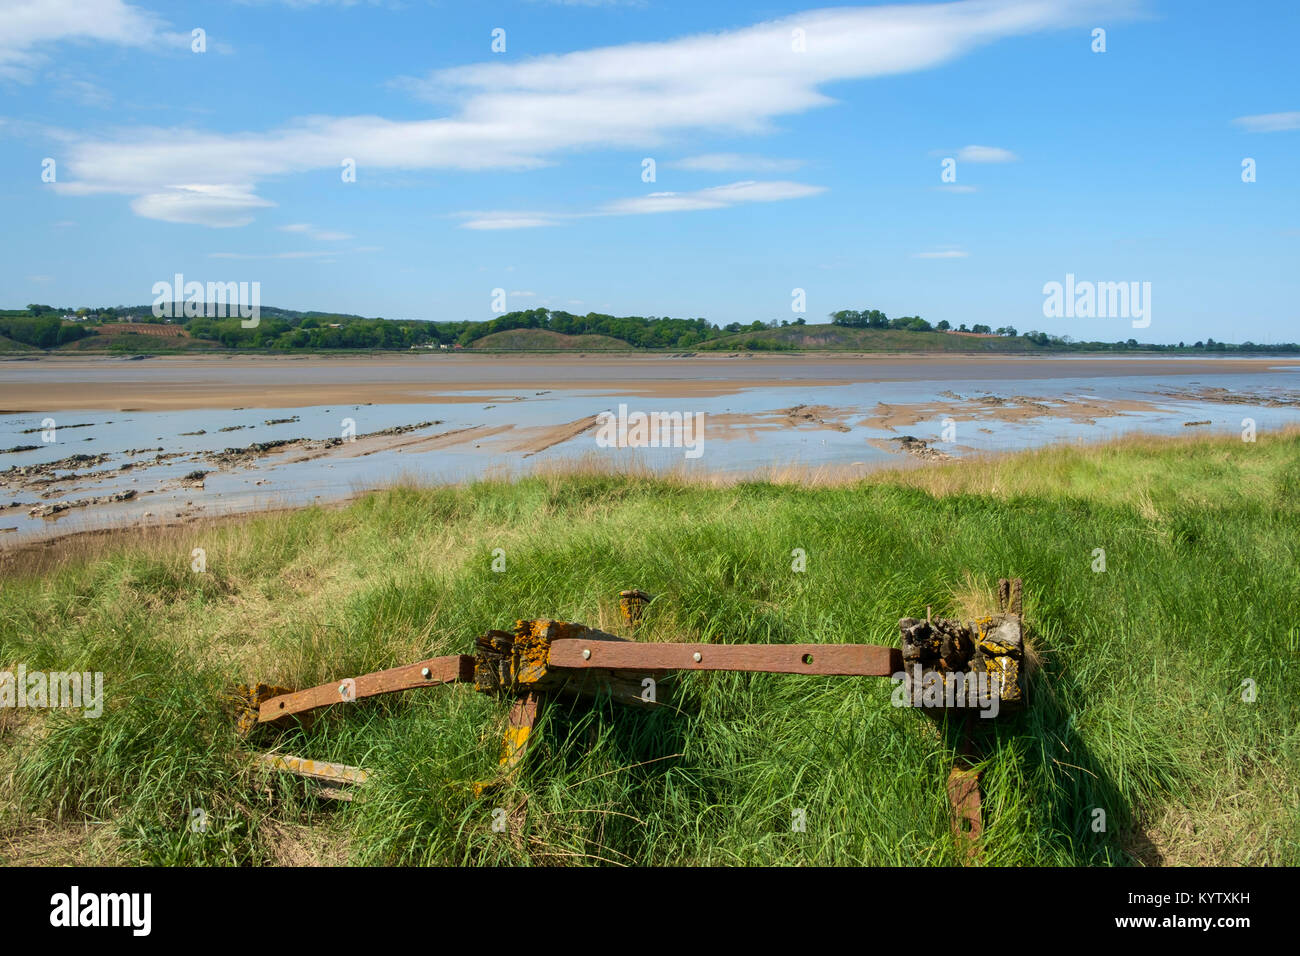 Obsolete small boats and barges were stranded on the banks of the tidal River Severn in Gloucestershire, UK to protect the river banks from erosion. Now they form an atmospheric local attraction to sightseers. Stock Photo